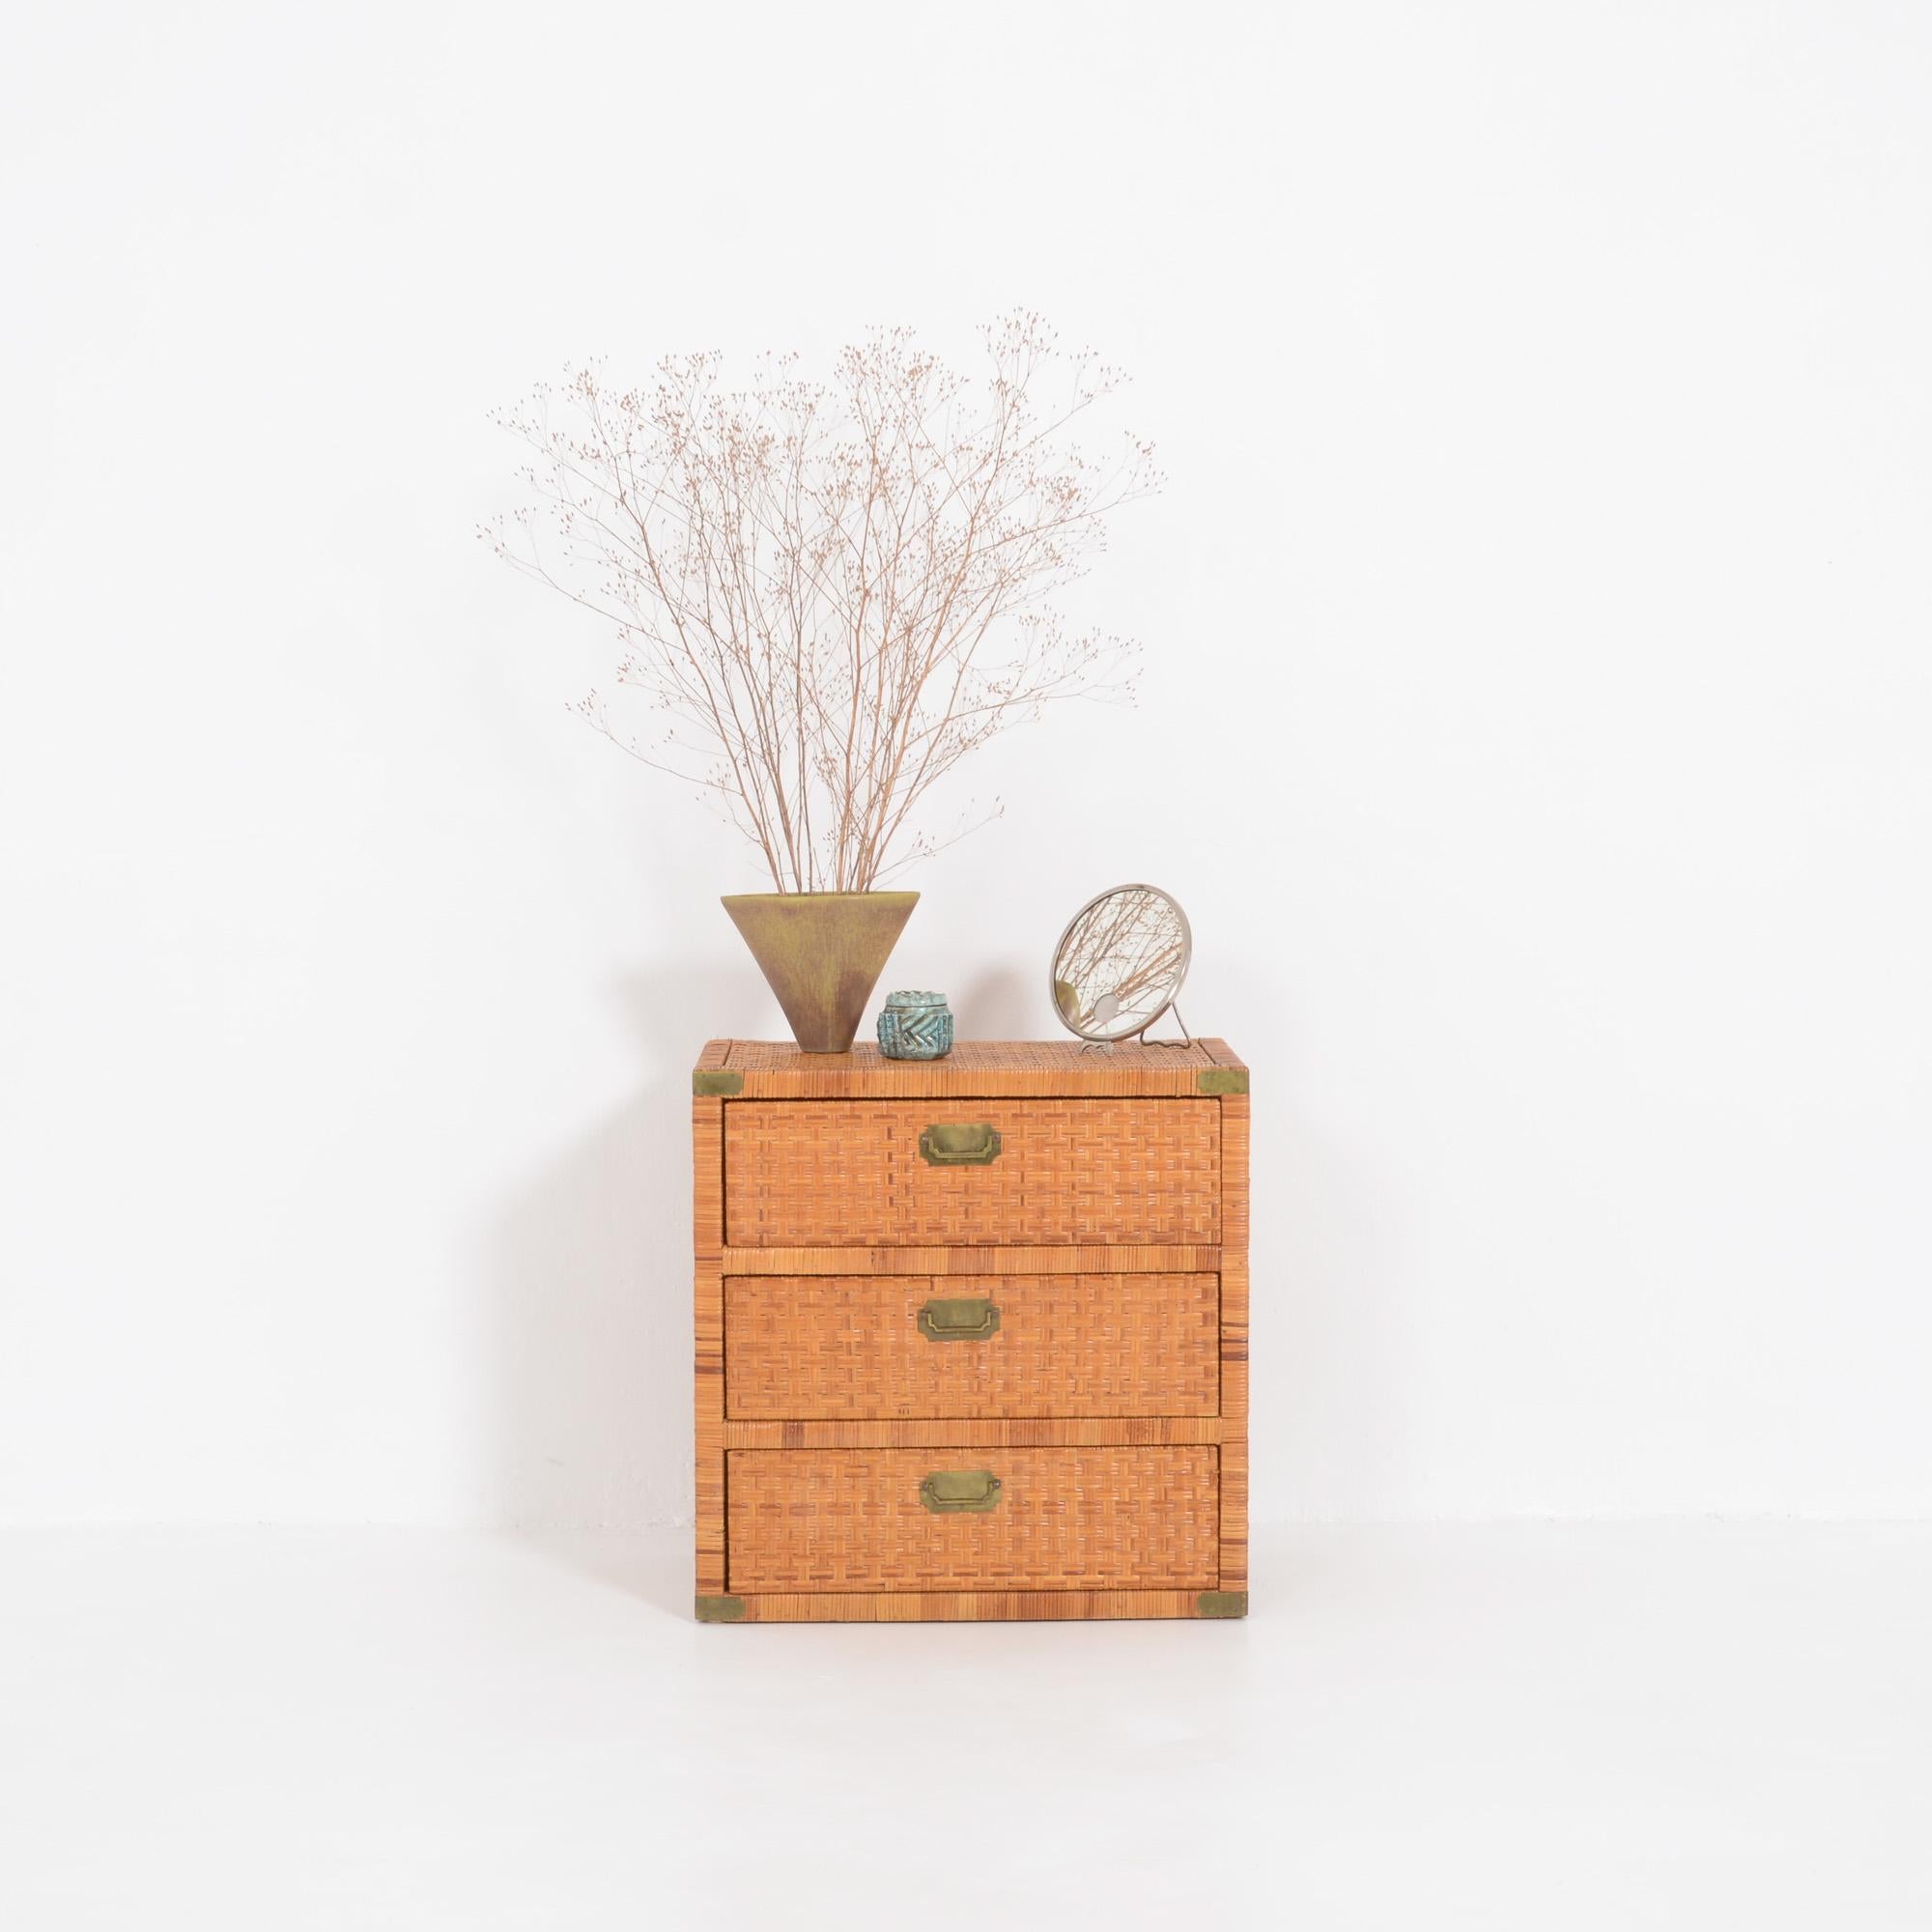 This rattan chest of drawers can be dated in the 1960s.
The 3 rattan drawers are finished with copper handles, placed asymmetrically.
It is a functional and decorative piece.
This vintage chest of drawers is in very good original condition, with